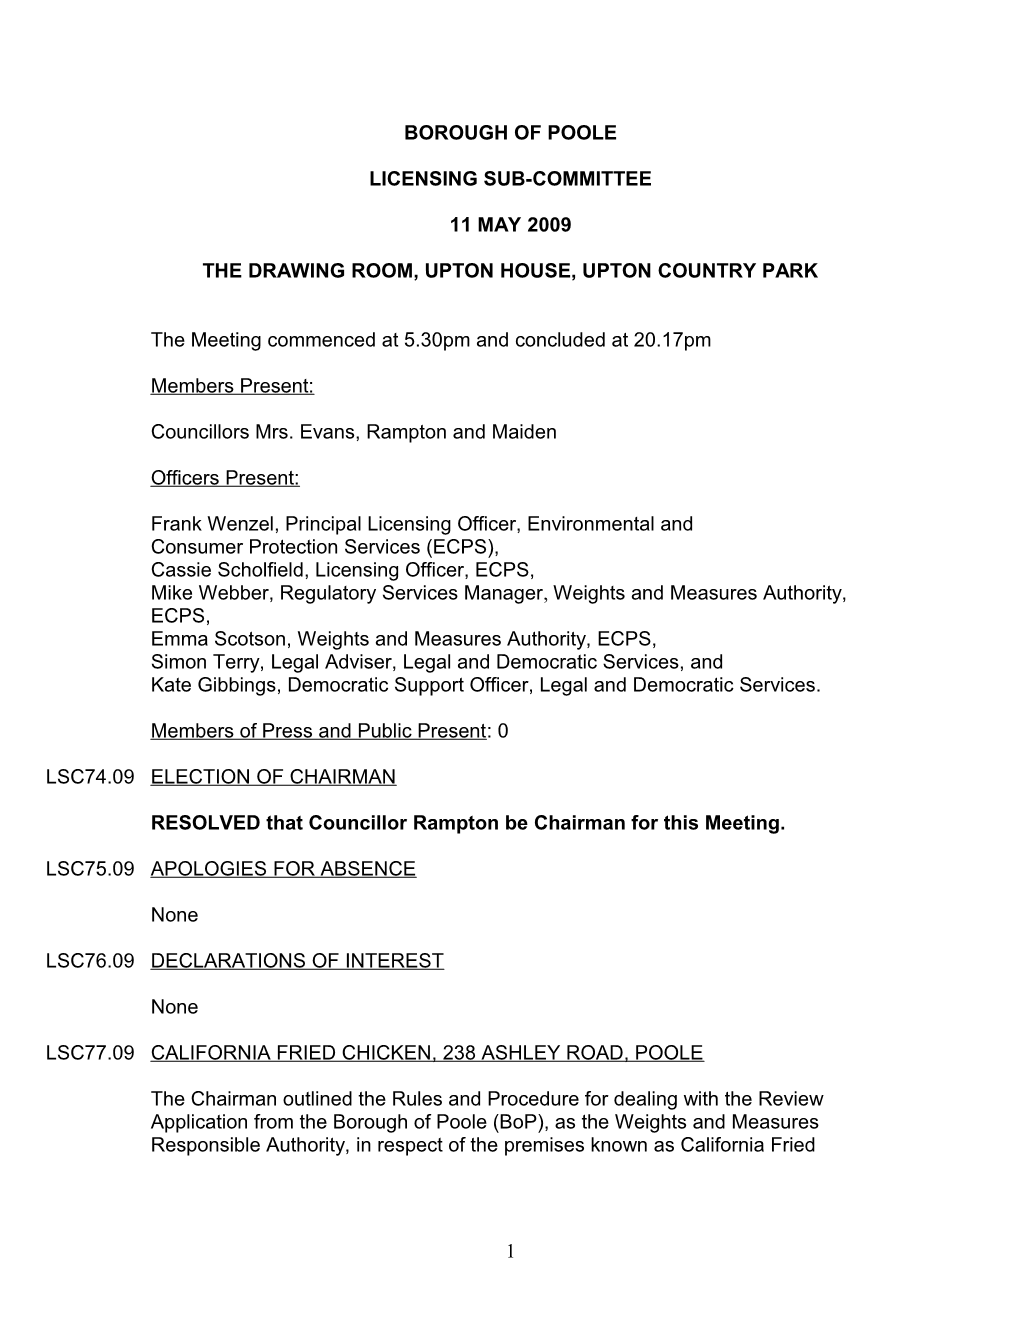 Minutes - Licensing Sub-Committee - 11 May 2009